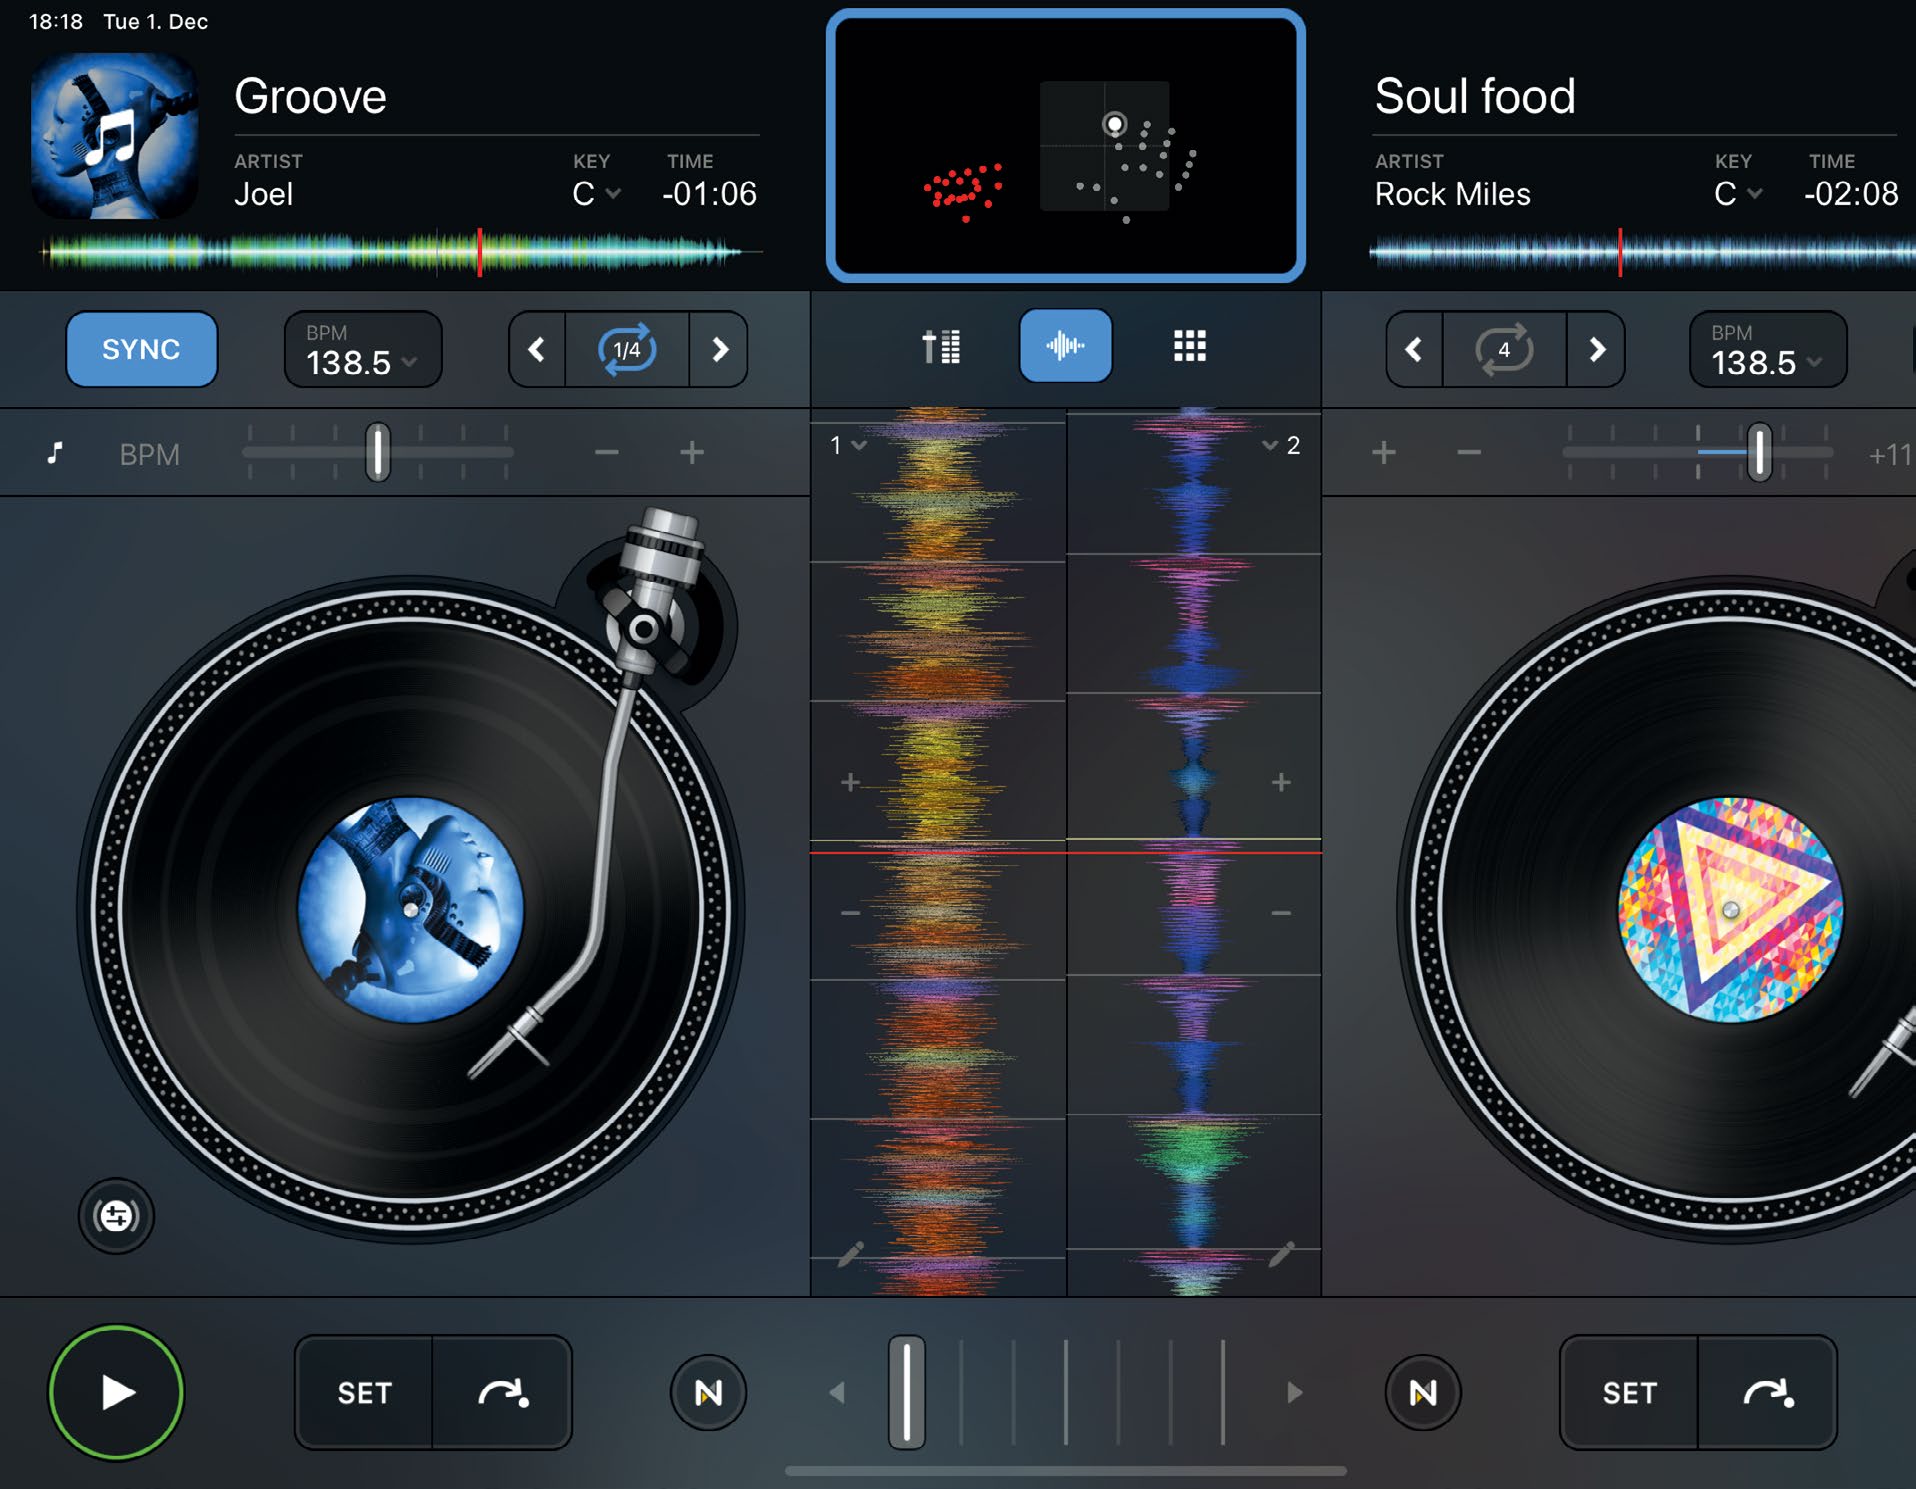 djay Pro AI for ios download free